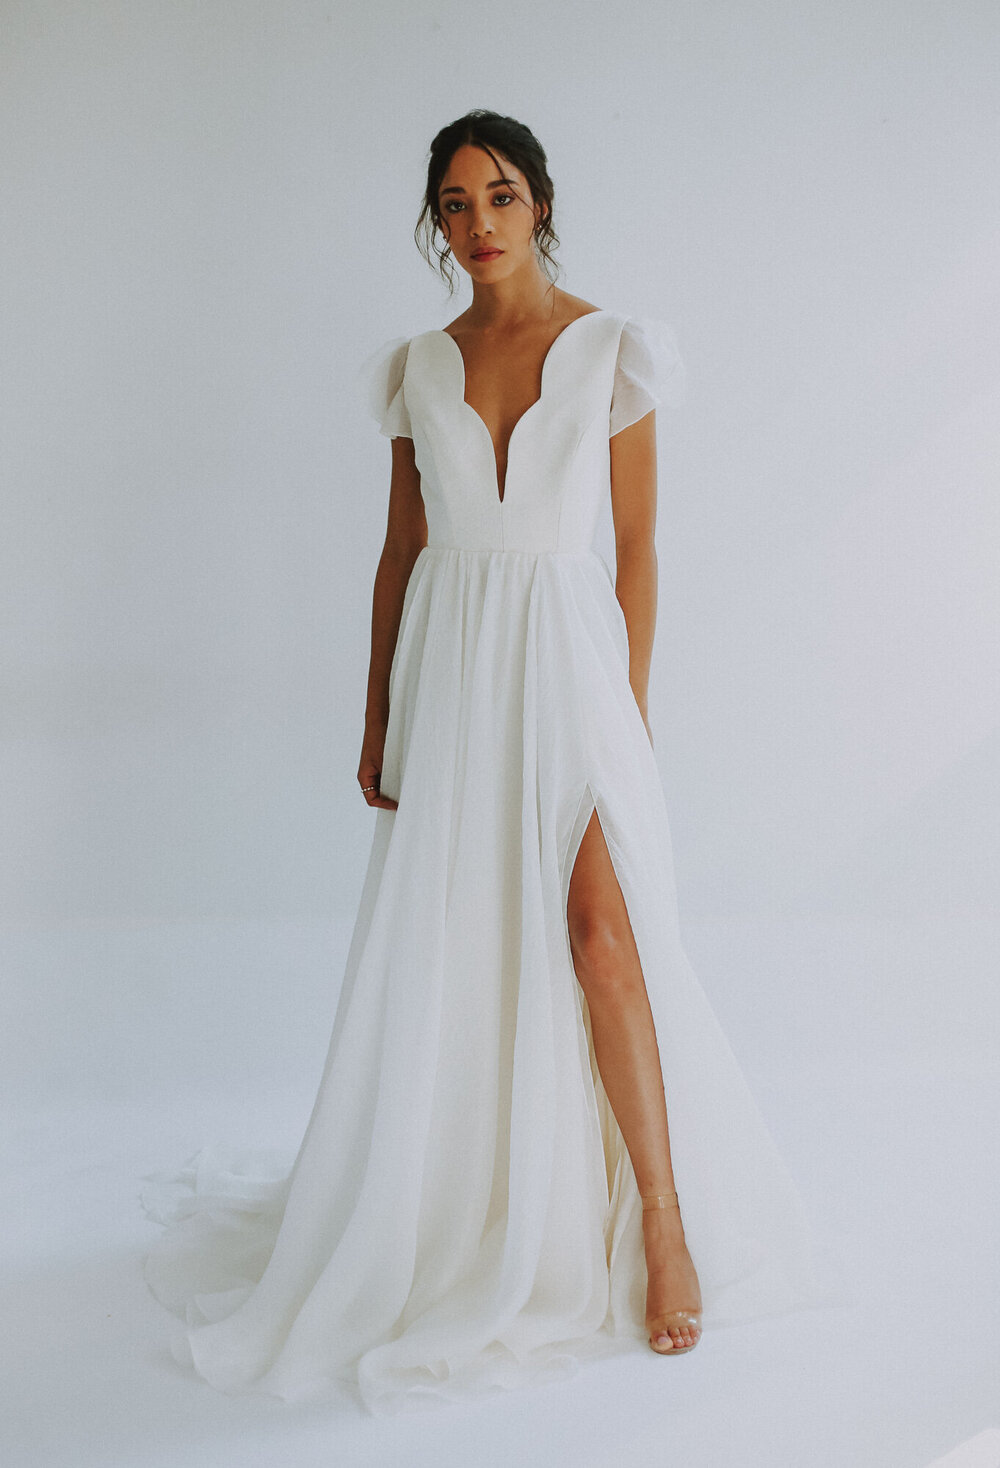 leanne marshall gown